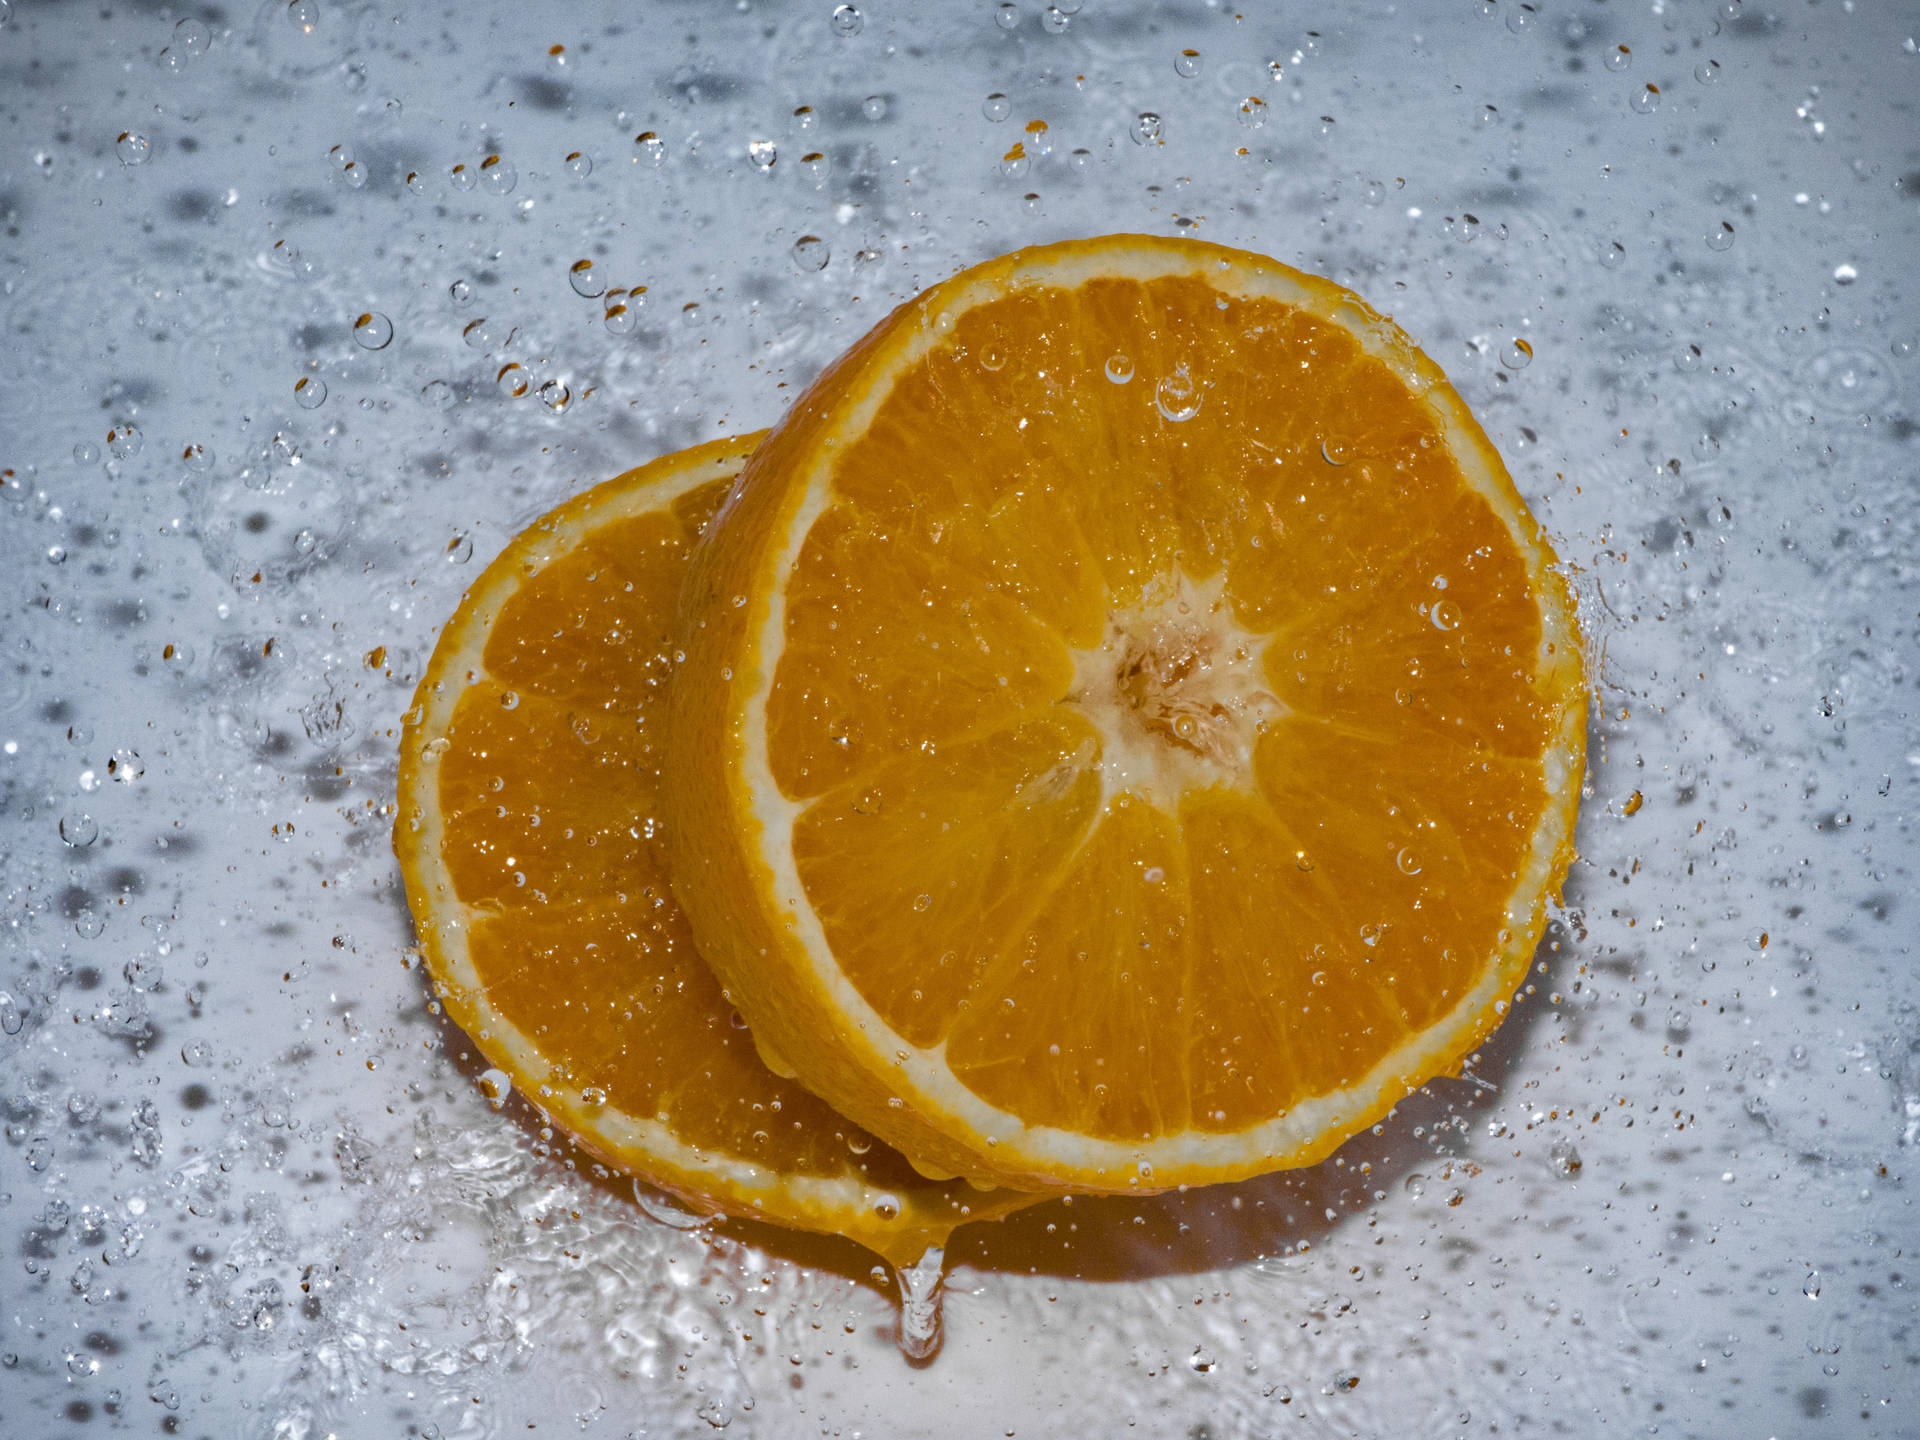 A delicious bowl of orange slices floating in a sea of mist Wallpaper